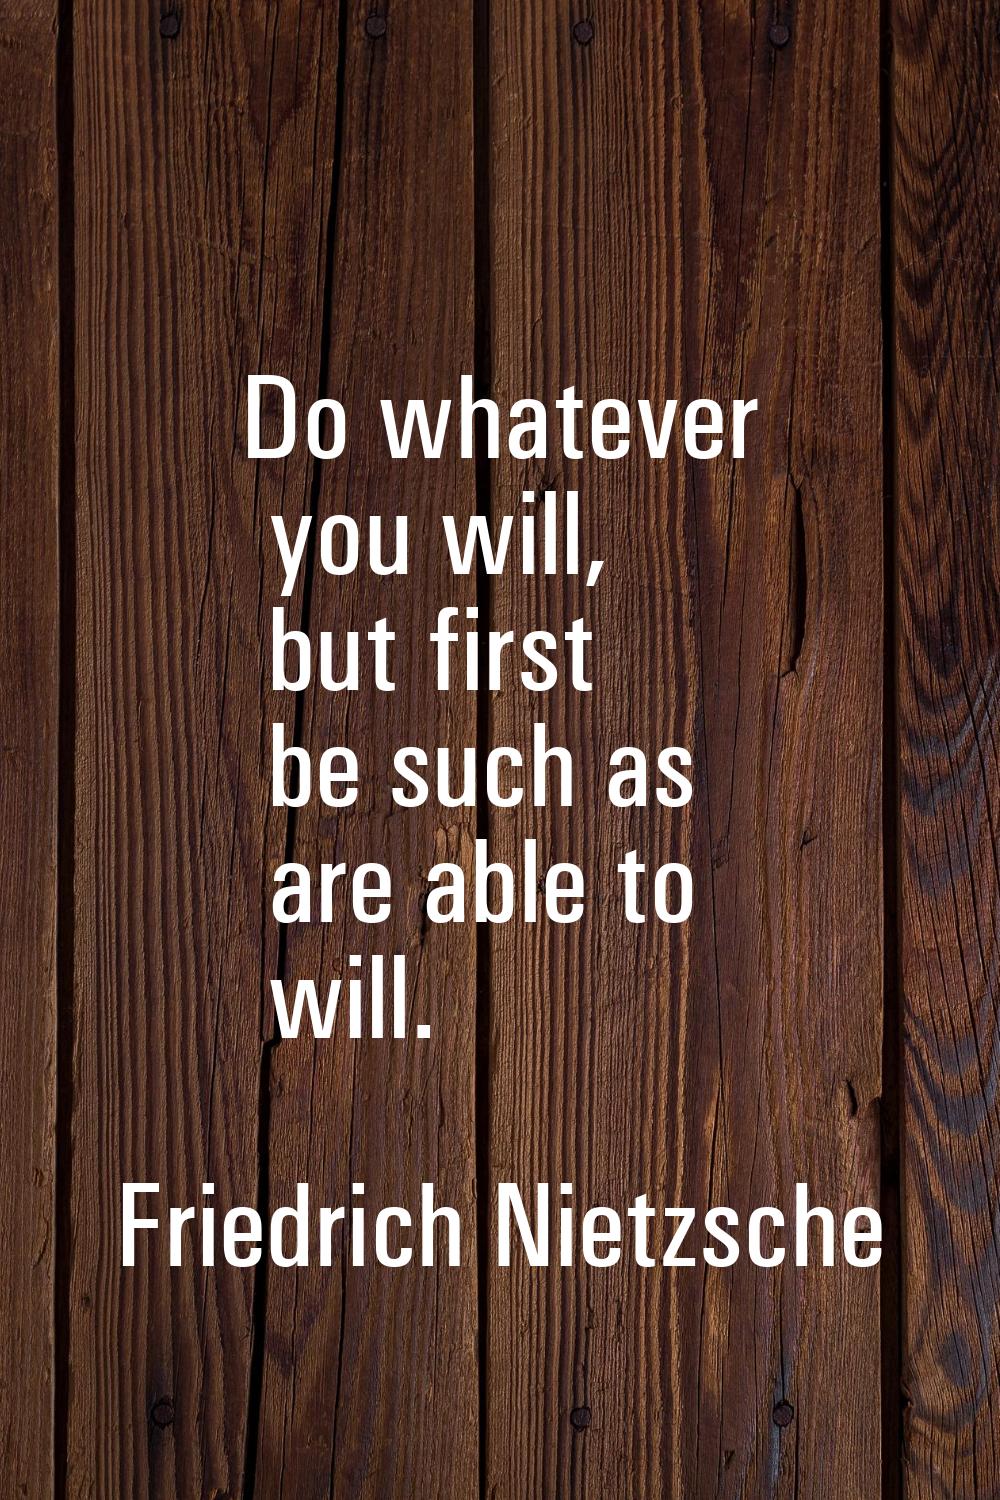 Do whatever you will, but first be such as are able to will.